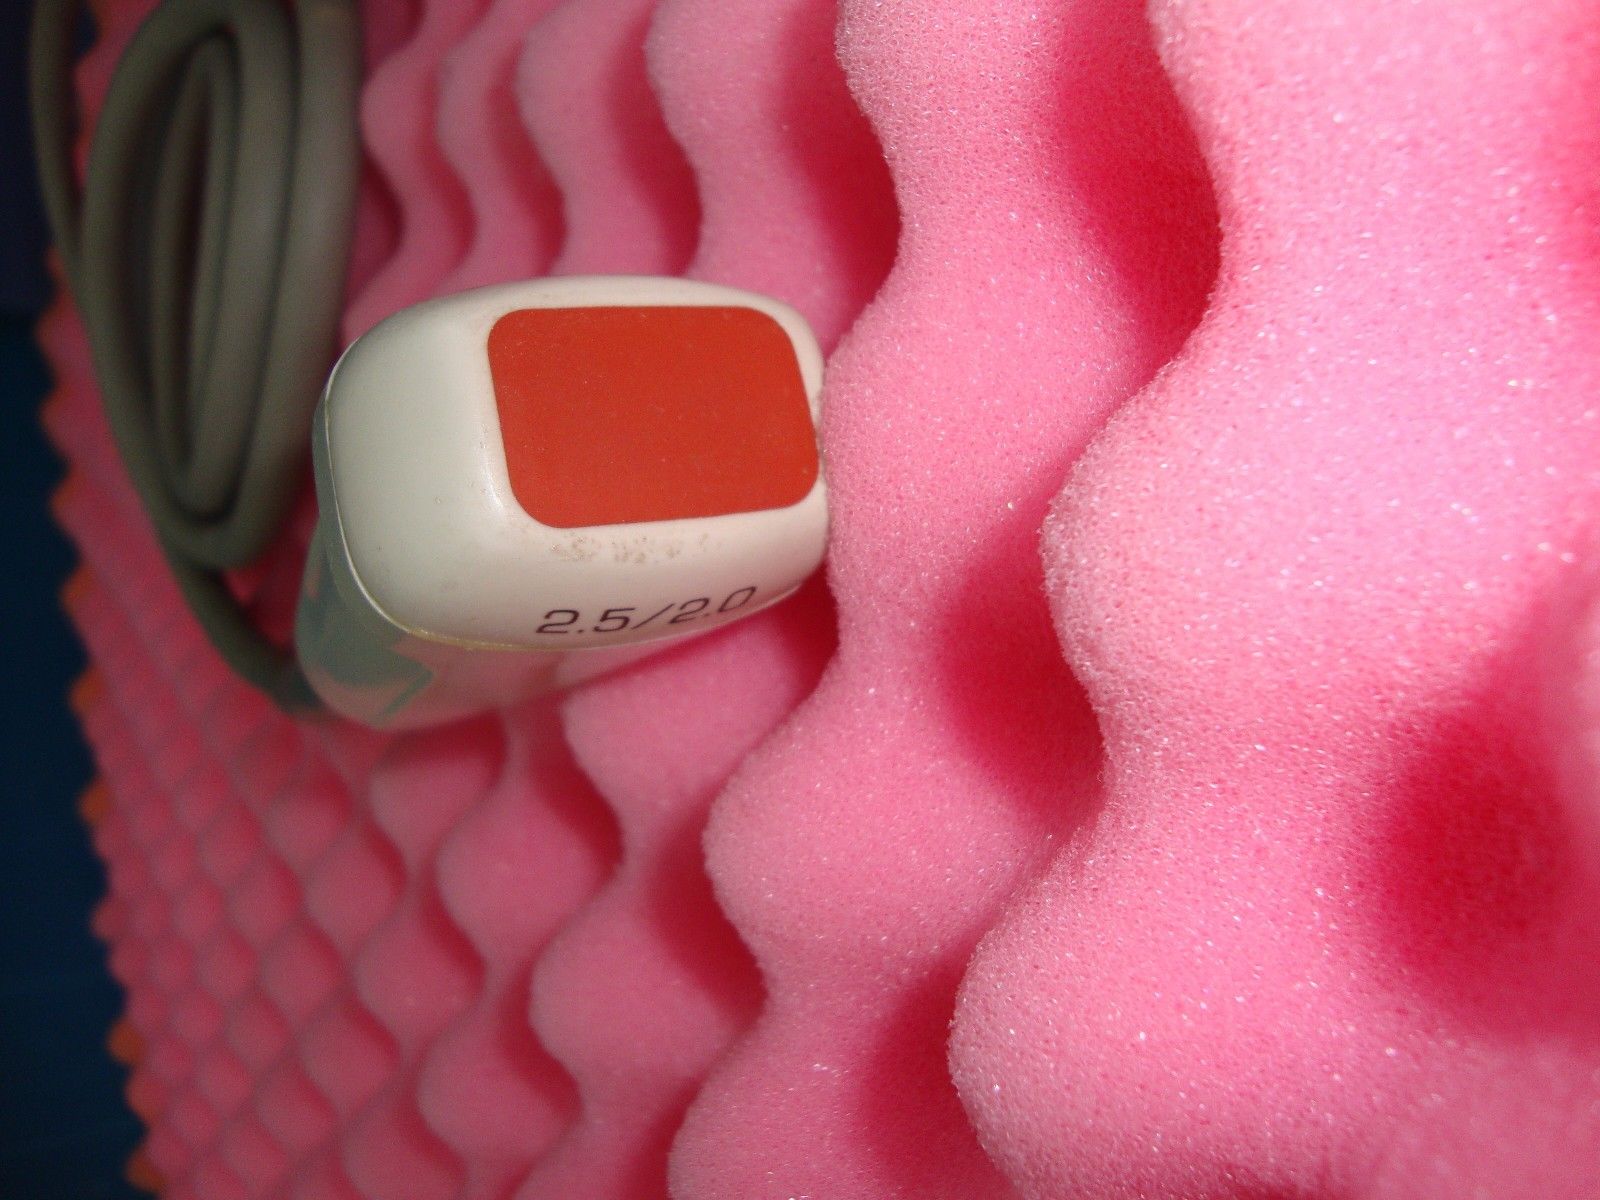 a close up of a red and white device on a pink surface